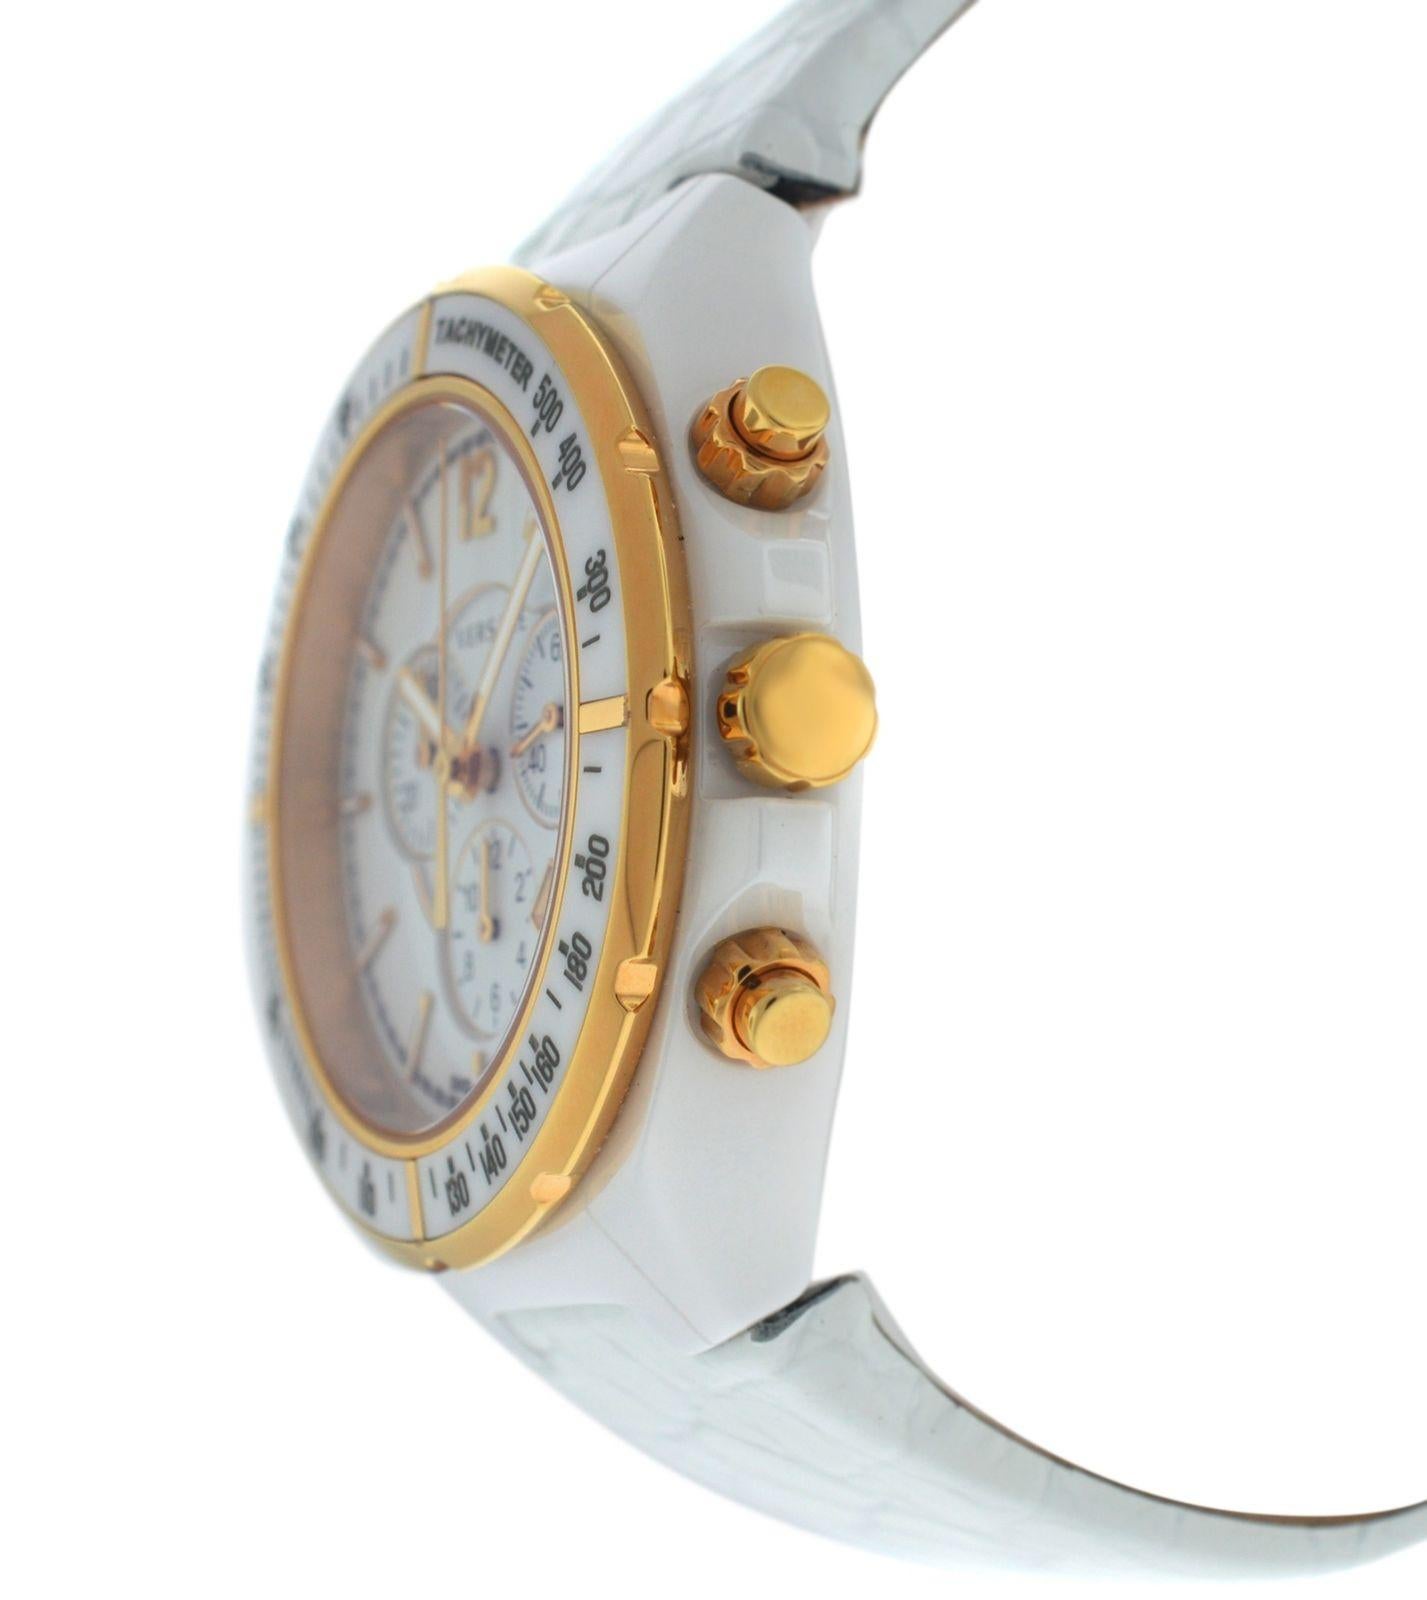 Brand	Versace
Model	DV One 28CCP1D001 S001
Gender	Ladies
Condition	New
Movement	Swiss Quartz
Case Material	Ceramic & gold tone steel
Bracelet / Strap Material	
Genuine leather

Clasp / Buckle Material	
Gold tone Stainless Steel

Clasp Type	Butterfly